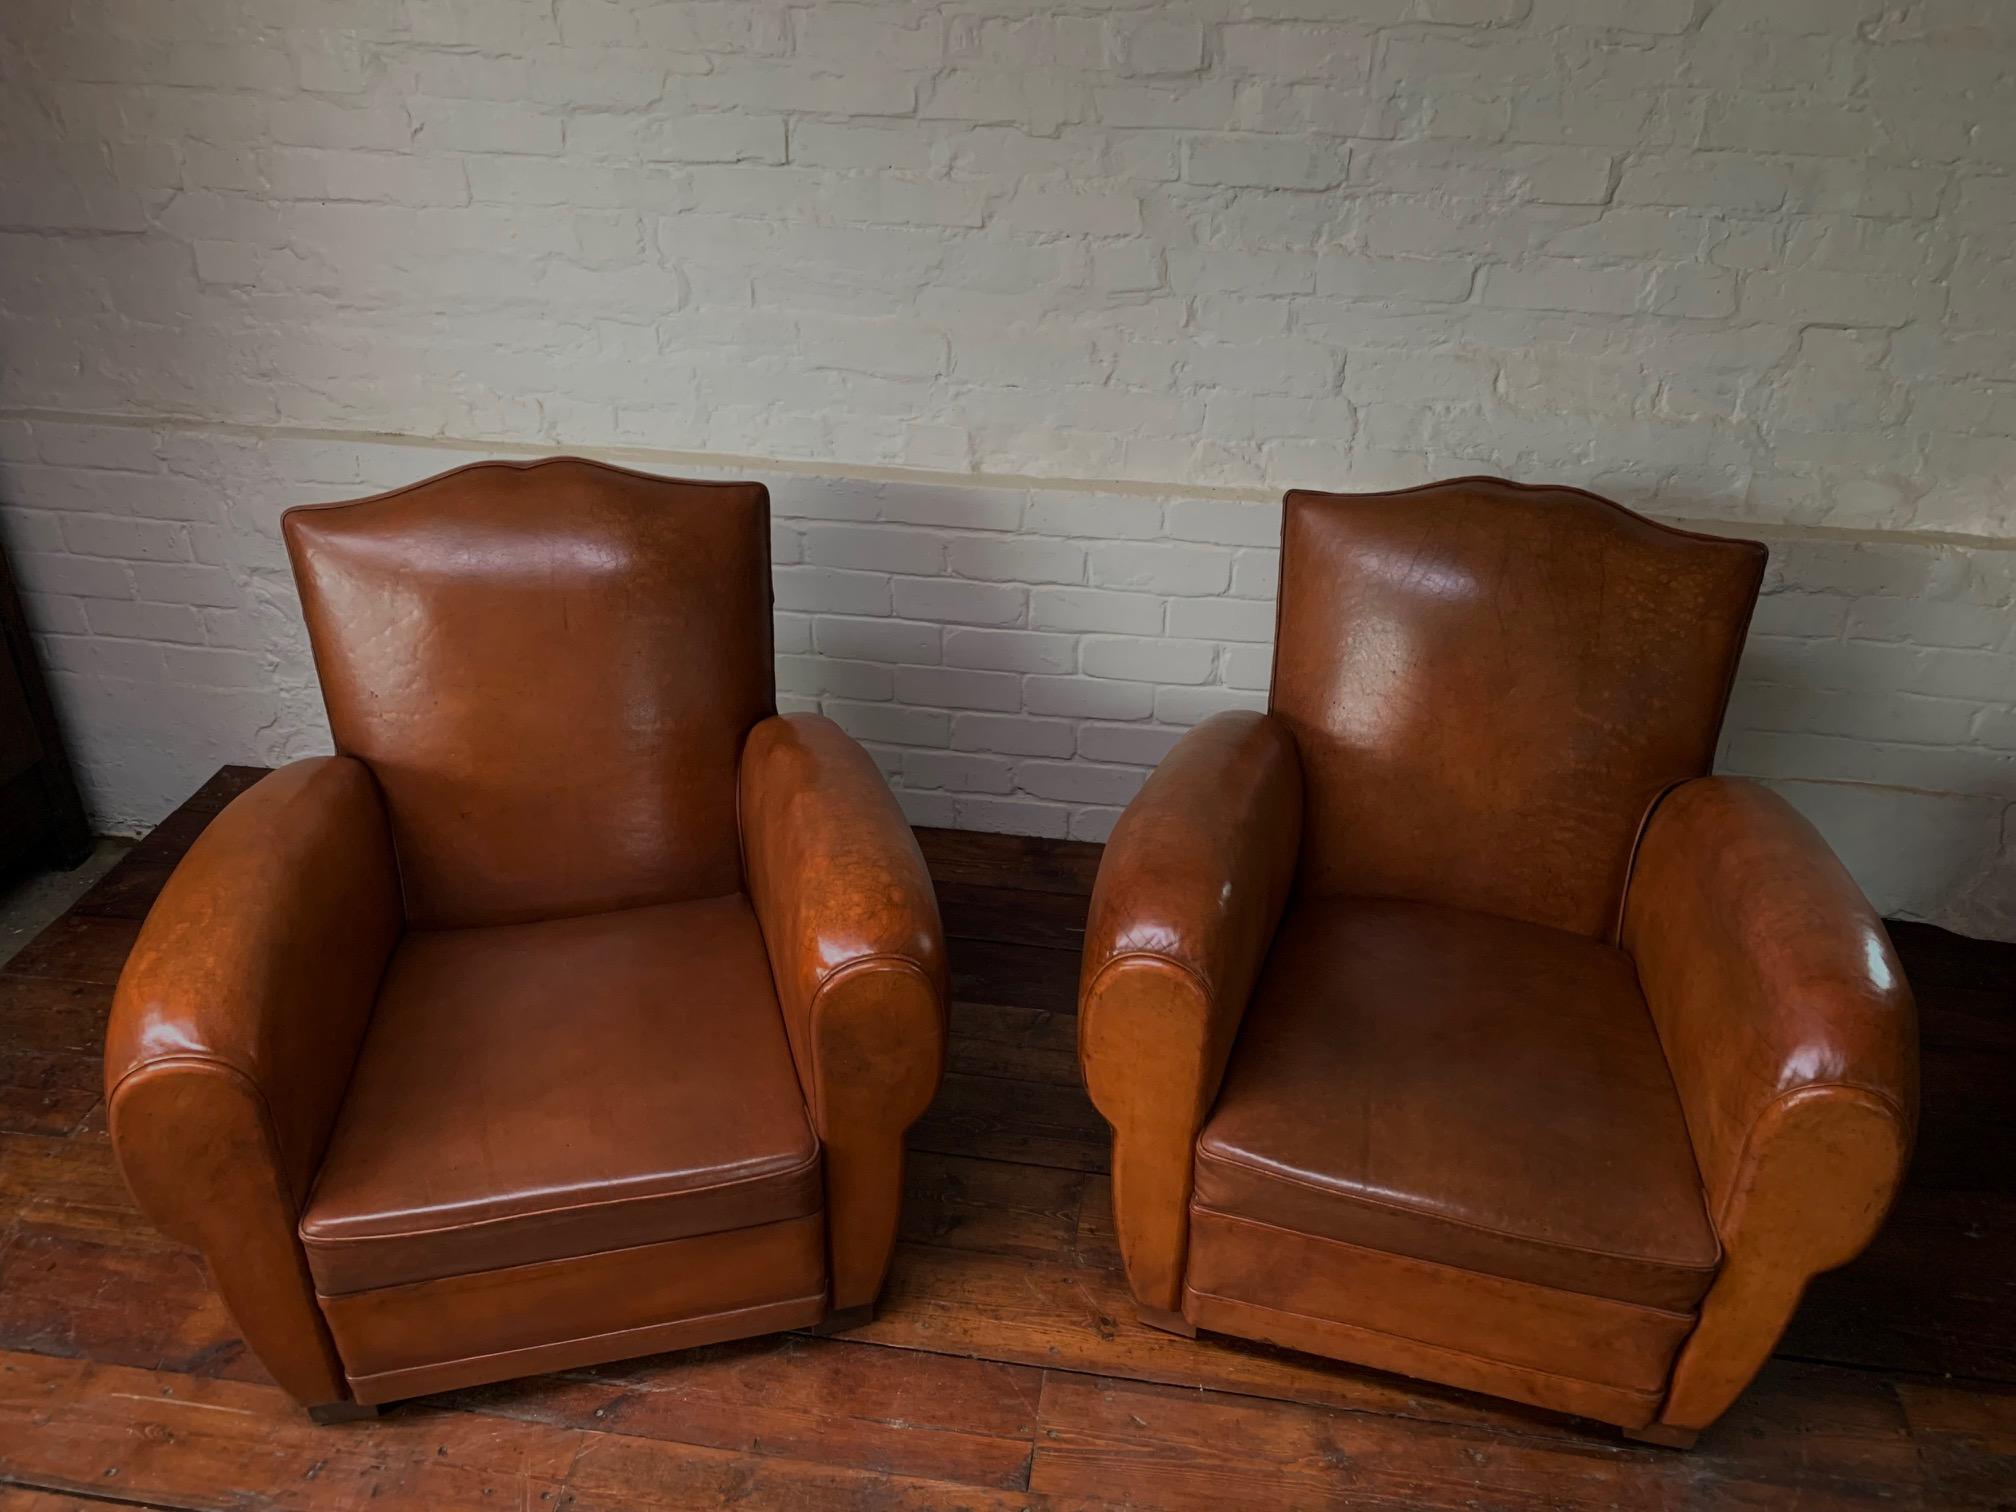 20th Century A Stunning Pair of French Leather Club Chairs, Caramel Moustache Models, C1940's